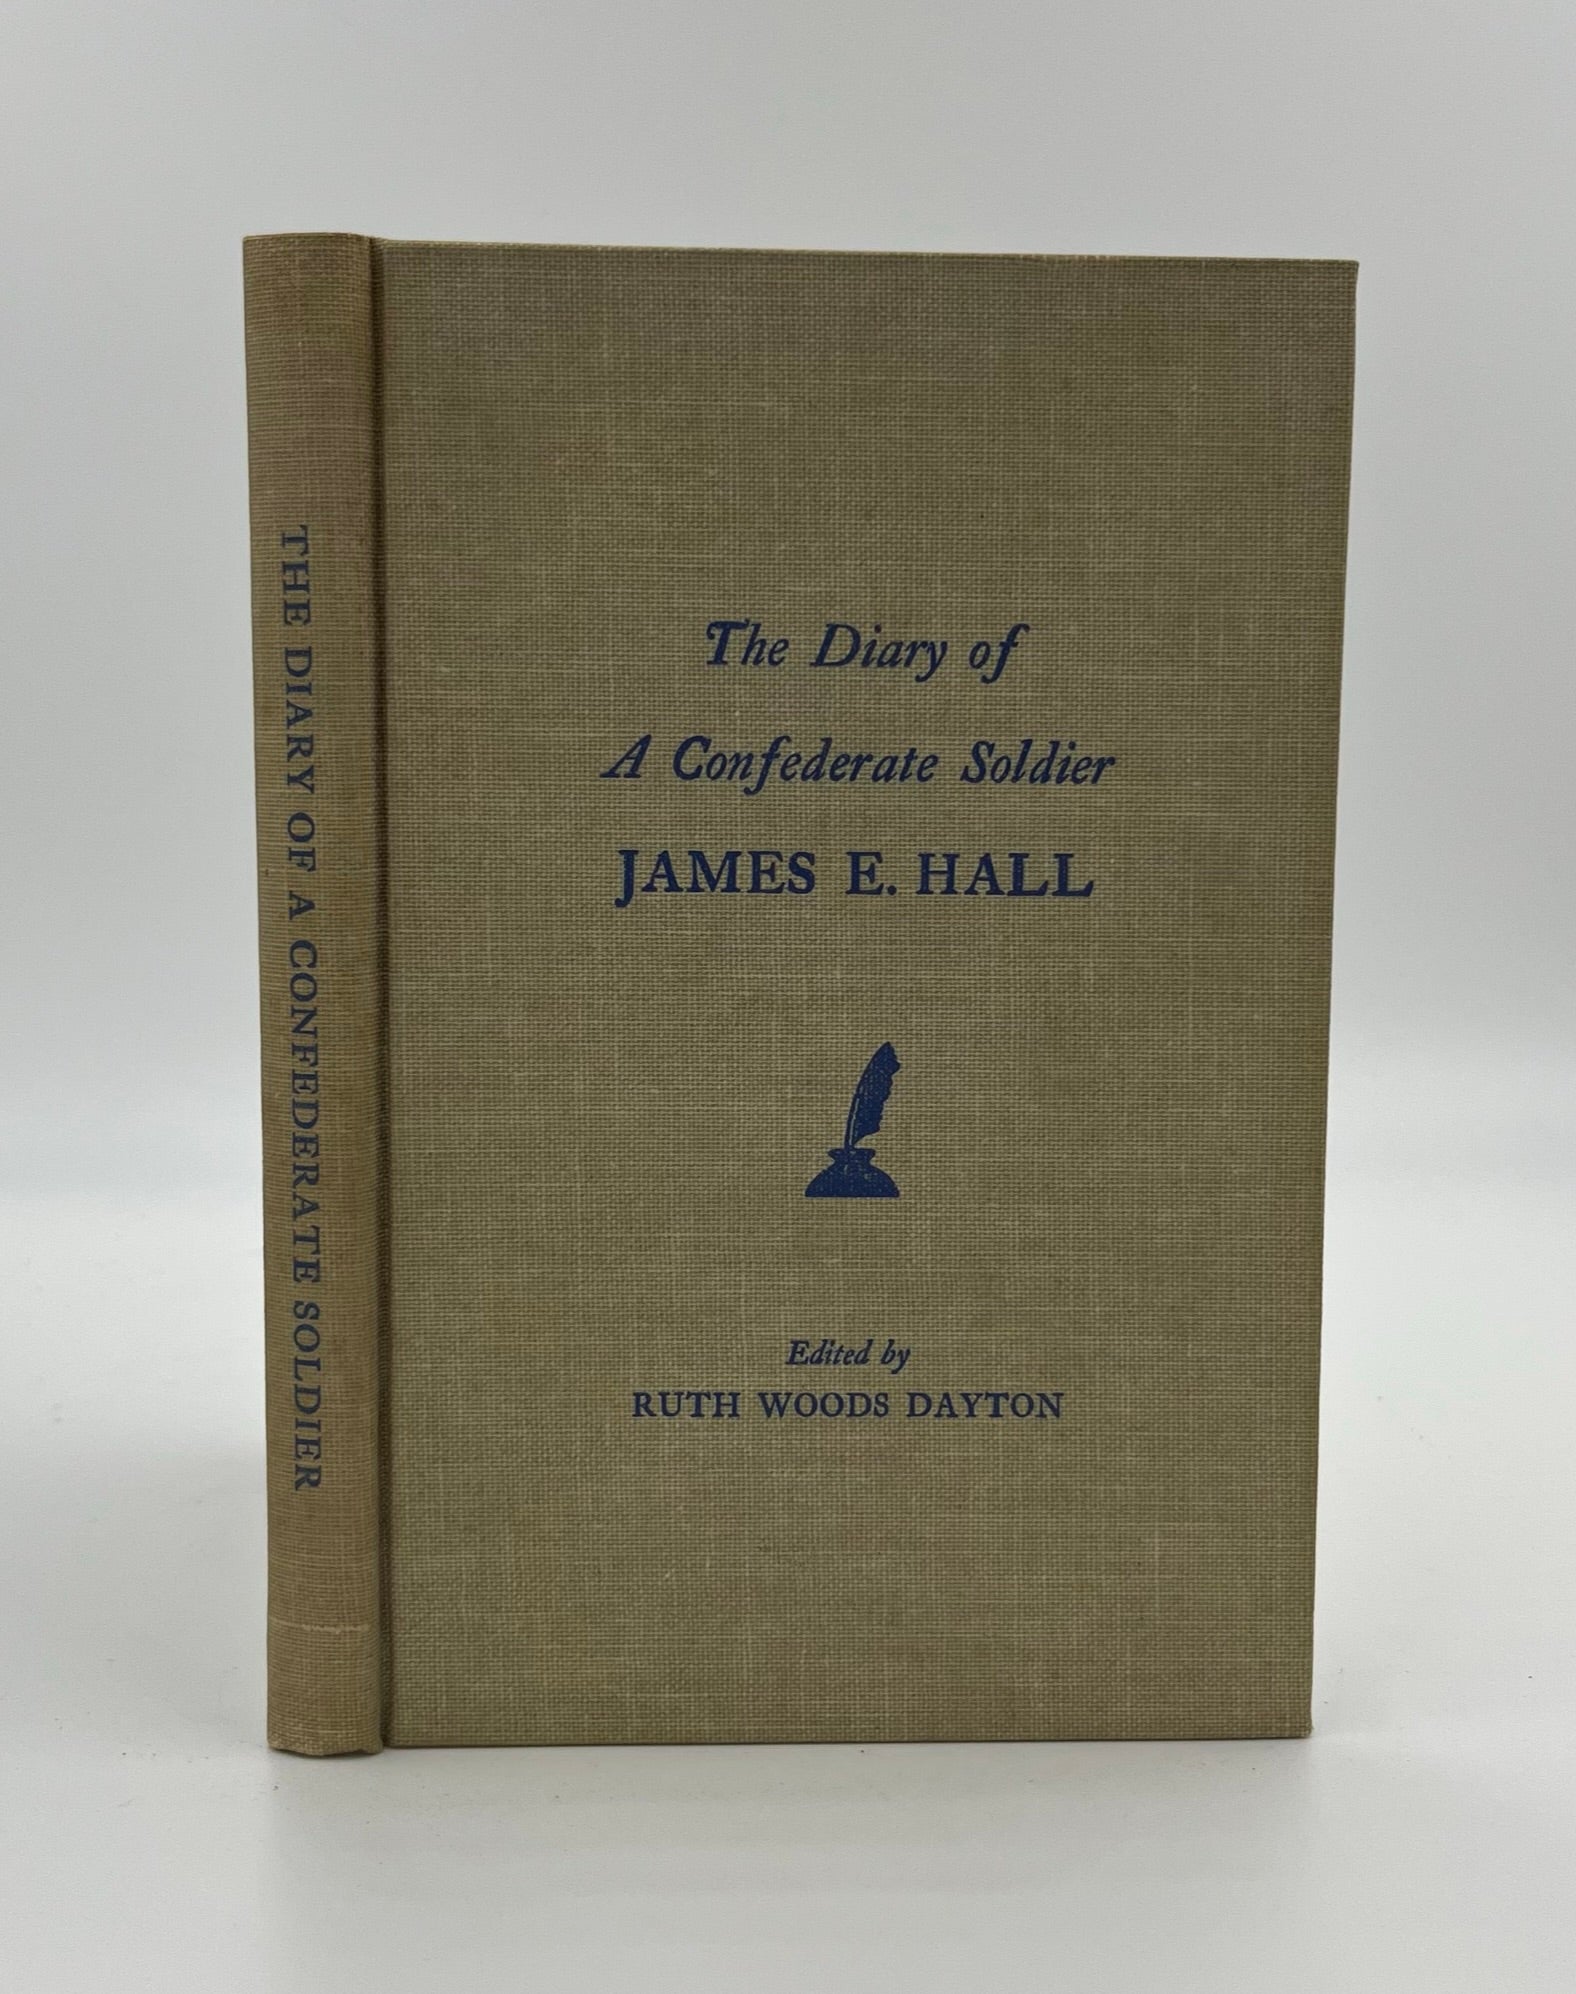 Book #160430 The Diary of a Confederate Soldier: James E. Hall. Ruth Woods Dayton.